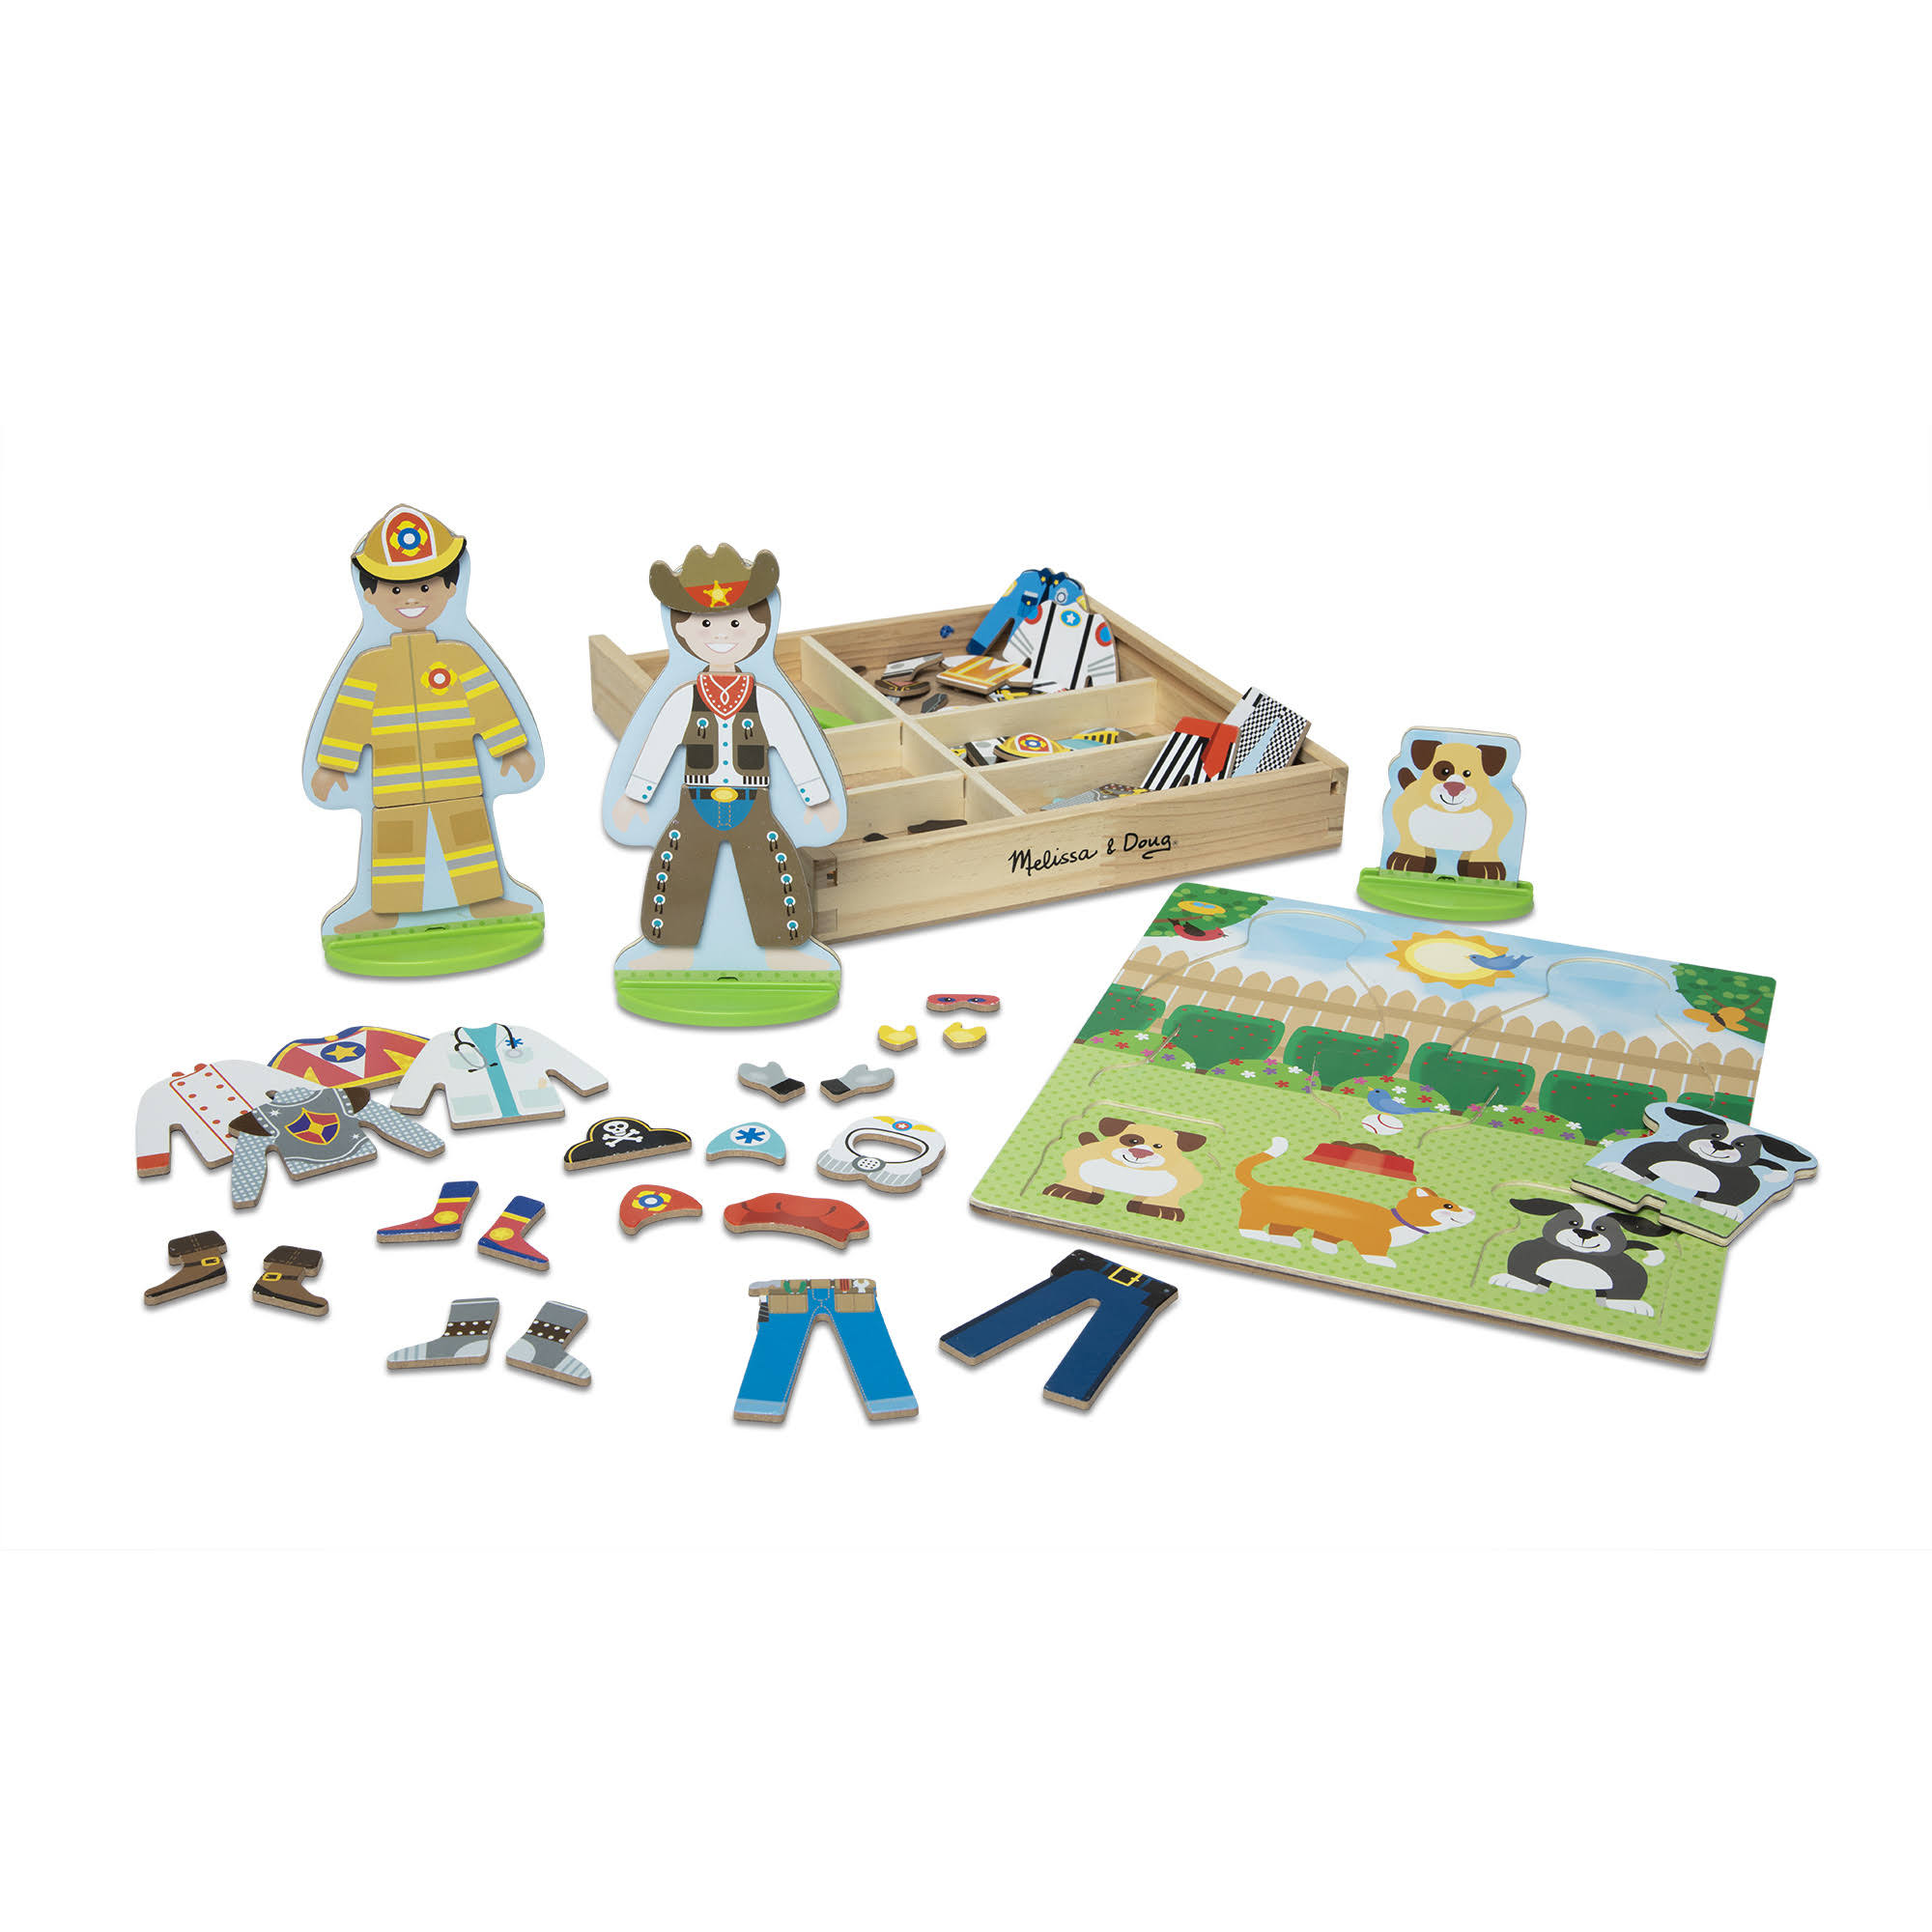 Melissa & Doug Occupations Magnetic Dress-up Wooden Dolls Pretend Play